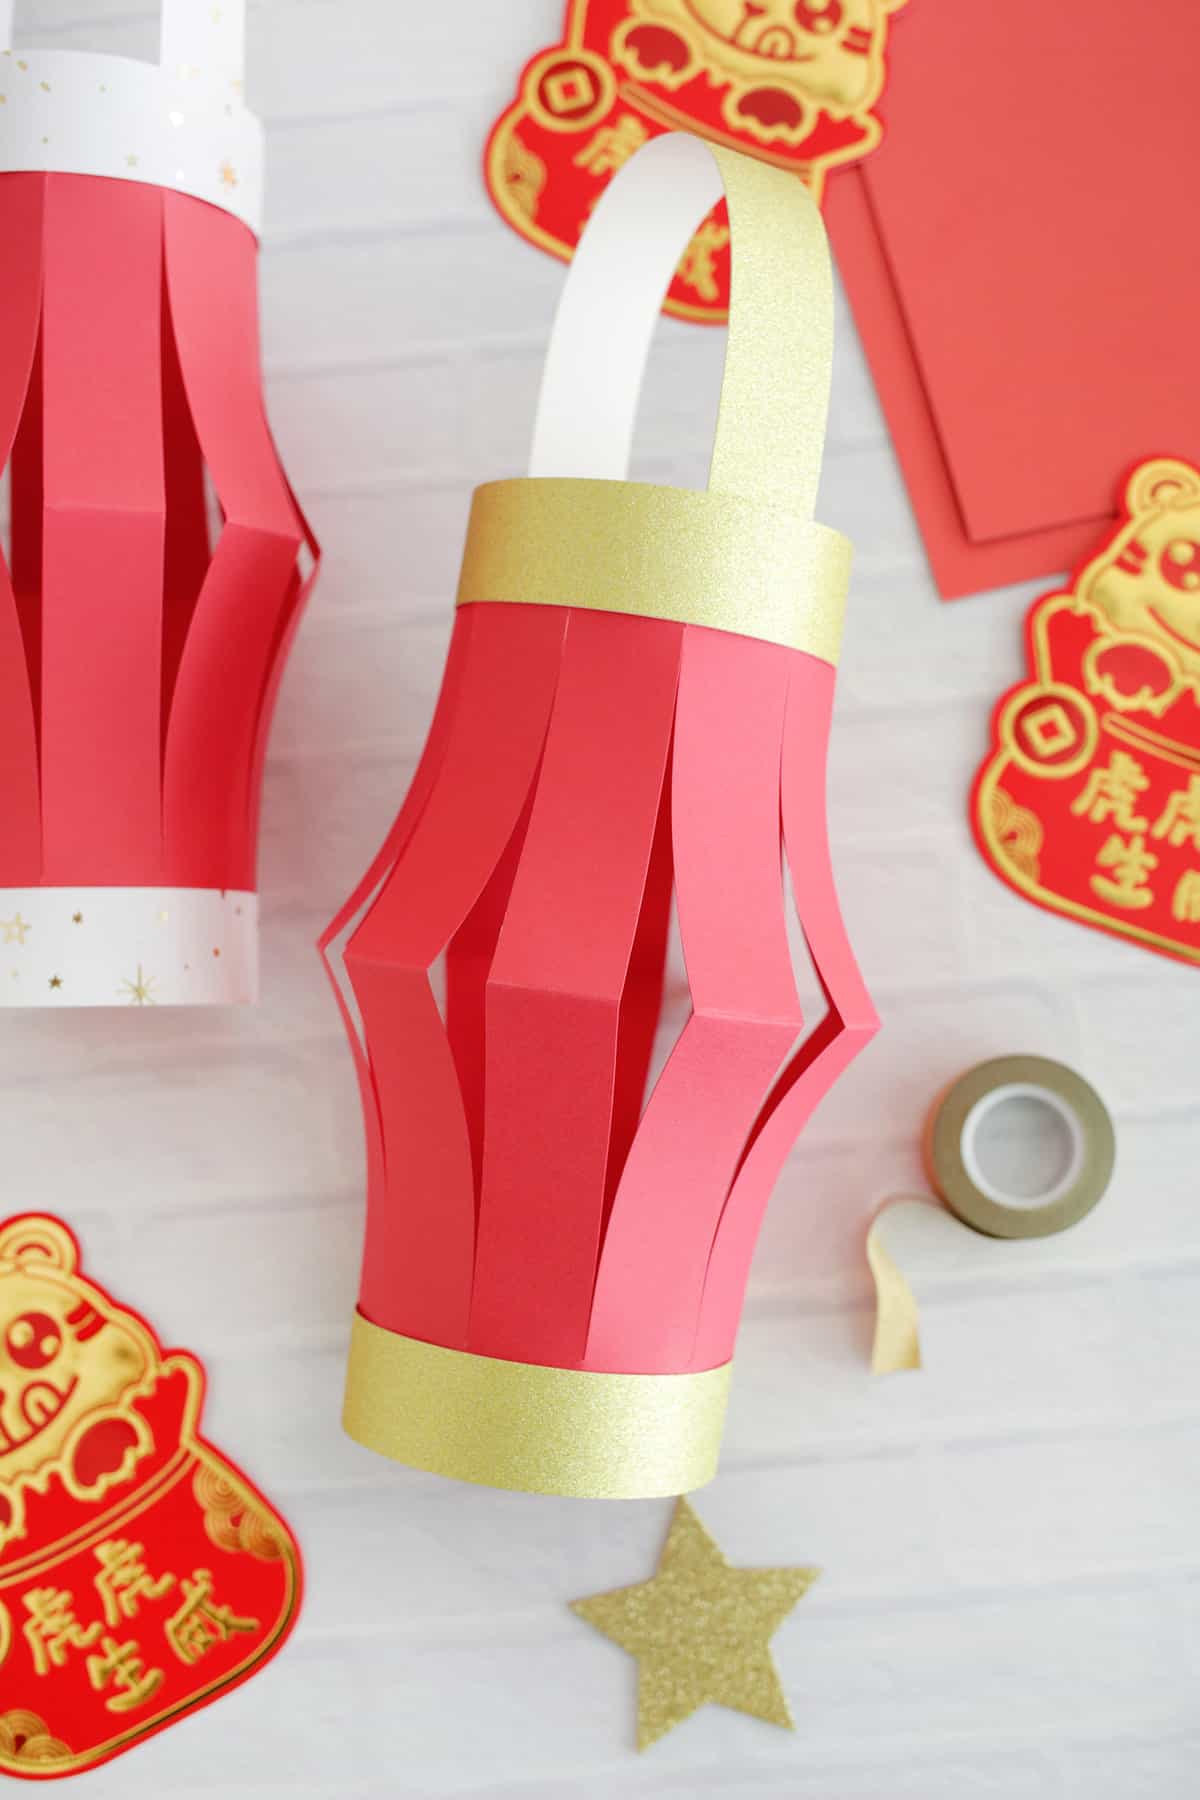 paper lantern for lunar chinese new year celebration